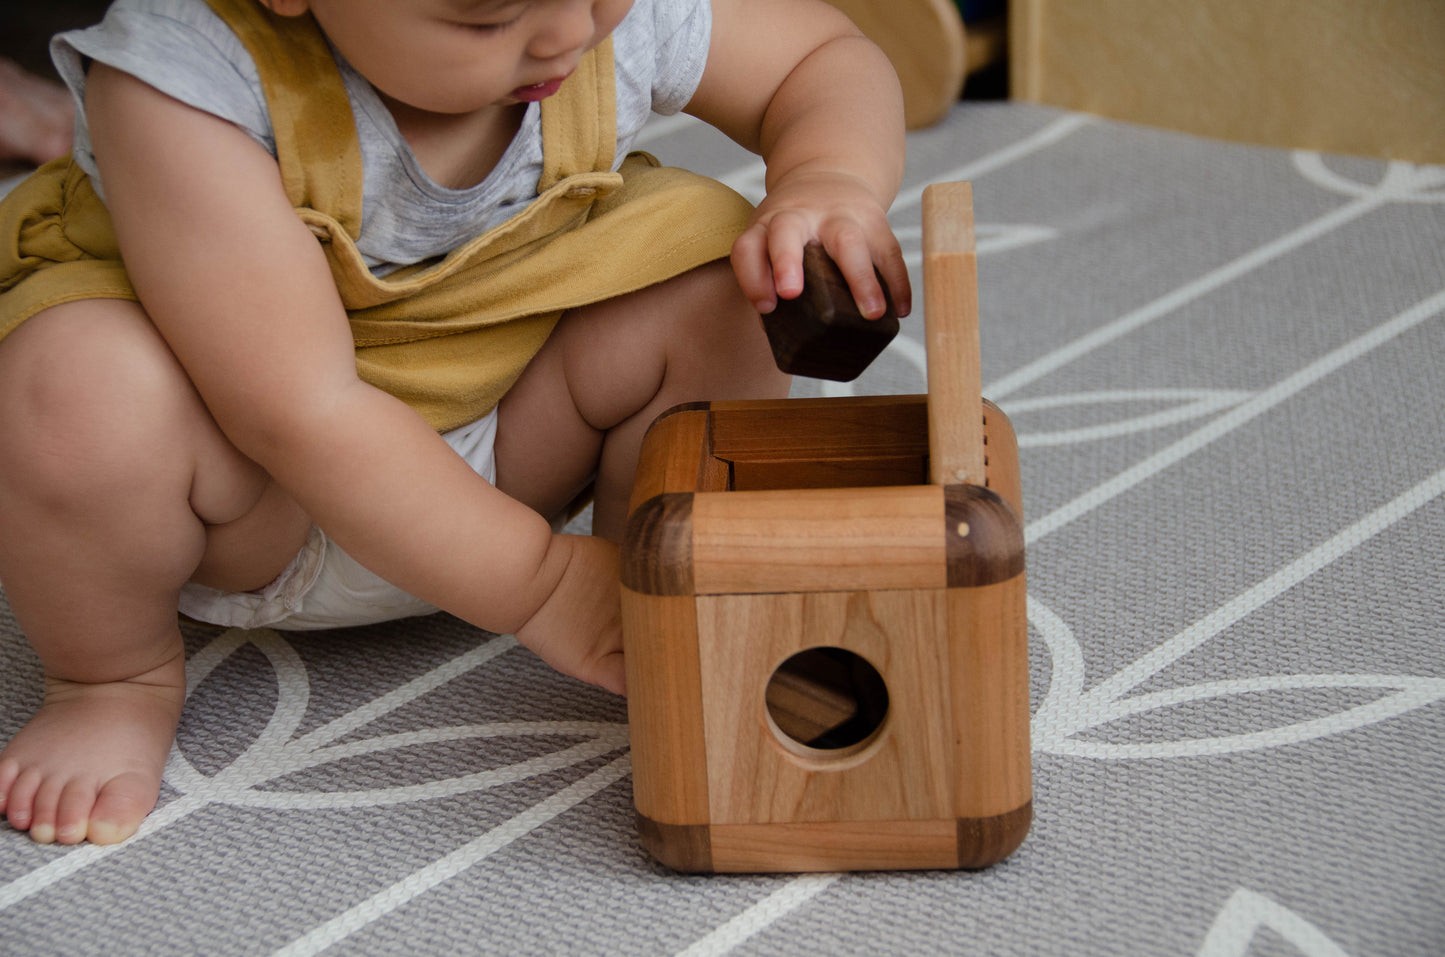 Endearing baby girl carefully putting back the insert pieces into the Cubos Lite, demonstrating her focus and fine motor skills as she tidies up after playtime.